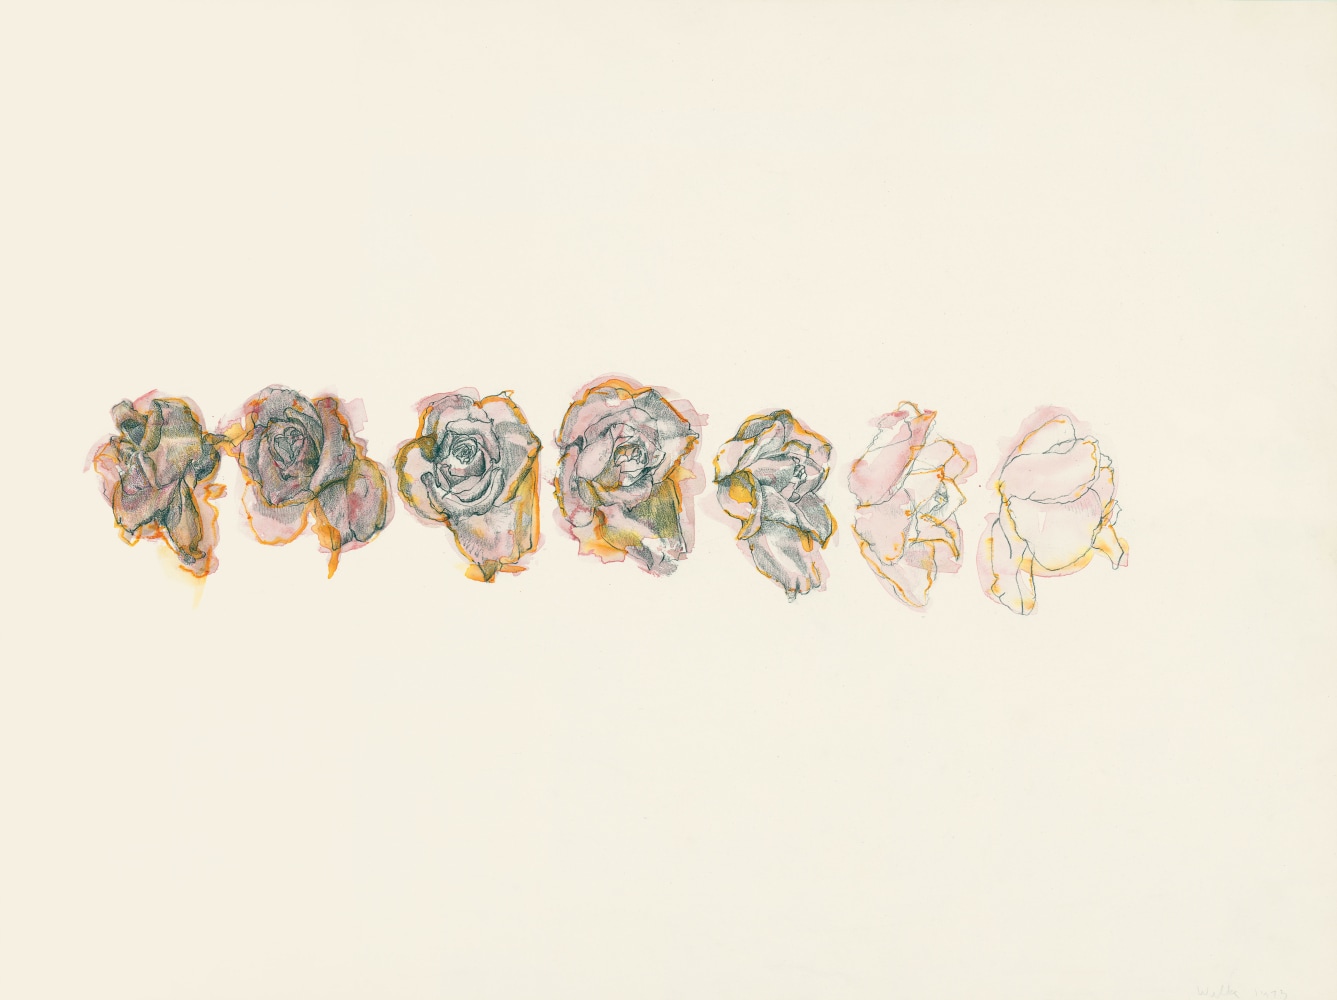 Hannah Wilke
Roses, 1975
Watercolor and pencil on paper
18 &amp;times; 24 inches (45.7 &amp;times; 61 cm)
Hannah Wilke Collection &amp;amp; Archive, Los Angeles.
Courtesy Alison Jacques, London.
Photo: Andrew Scharlatt.